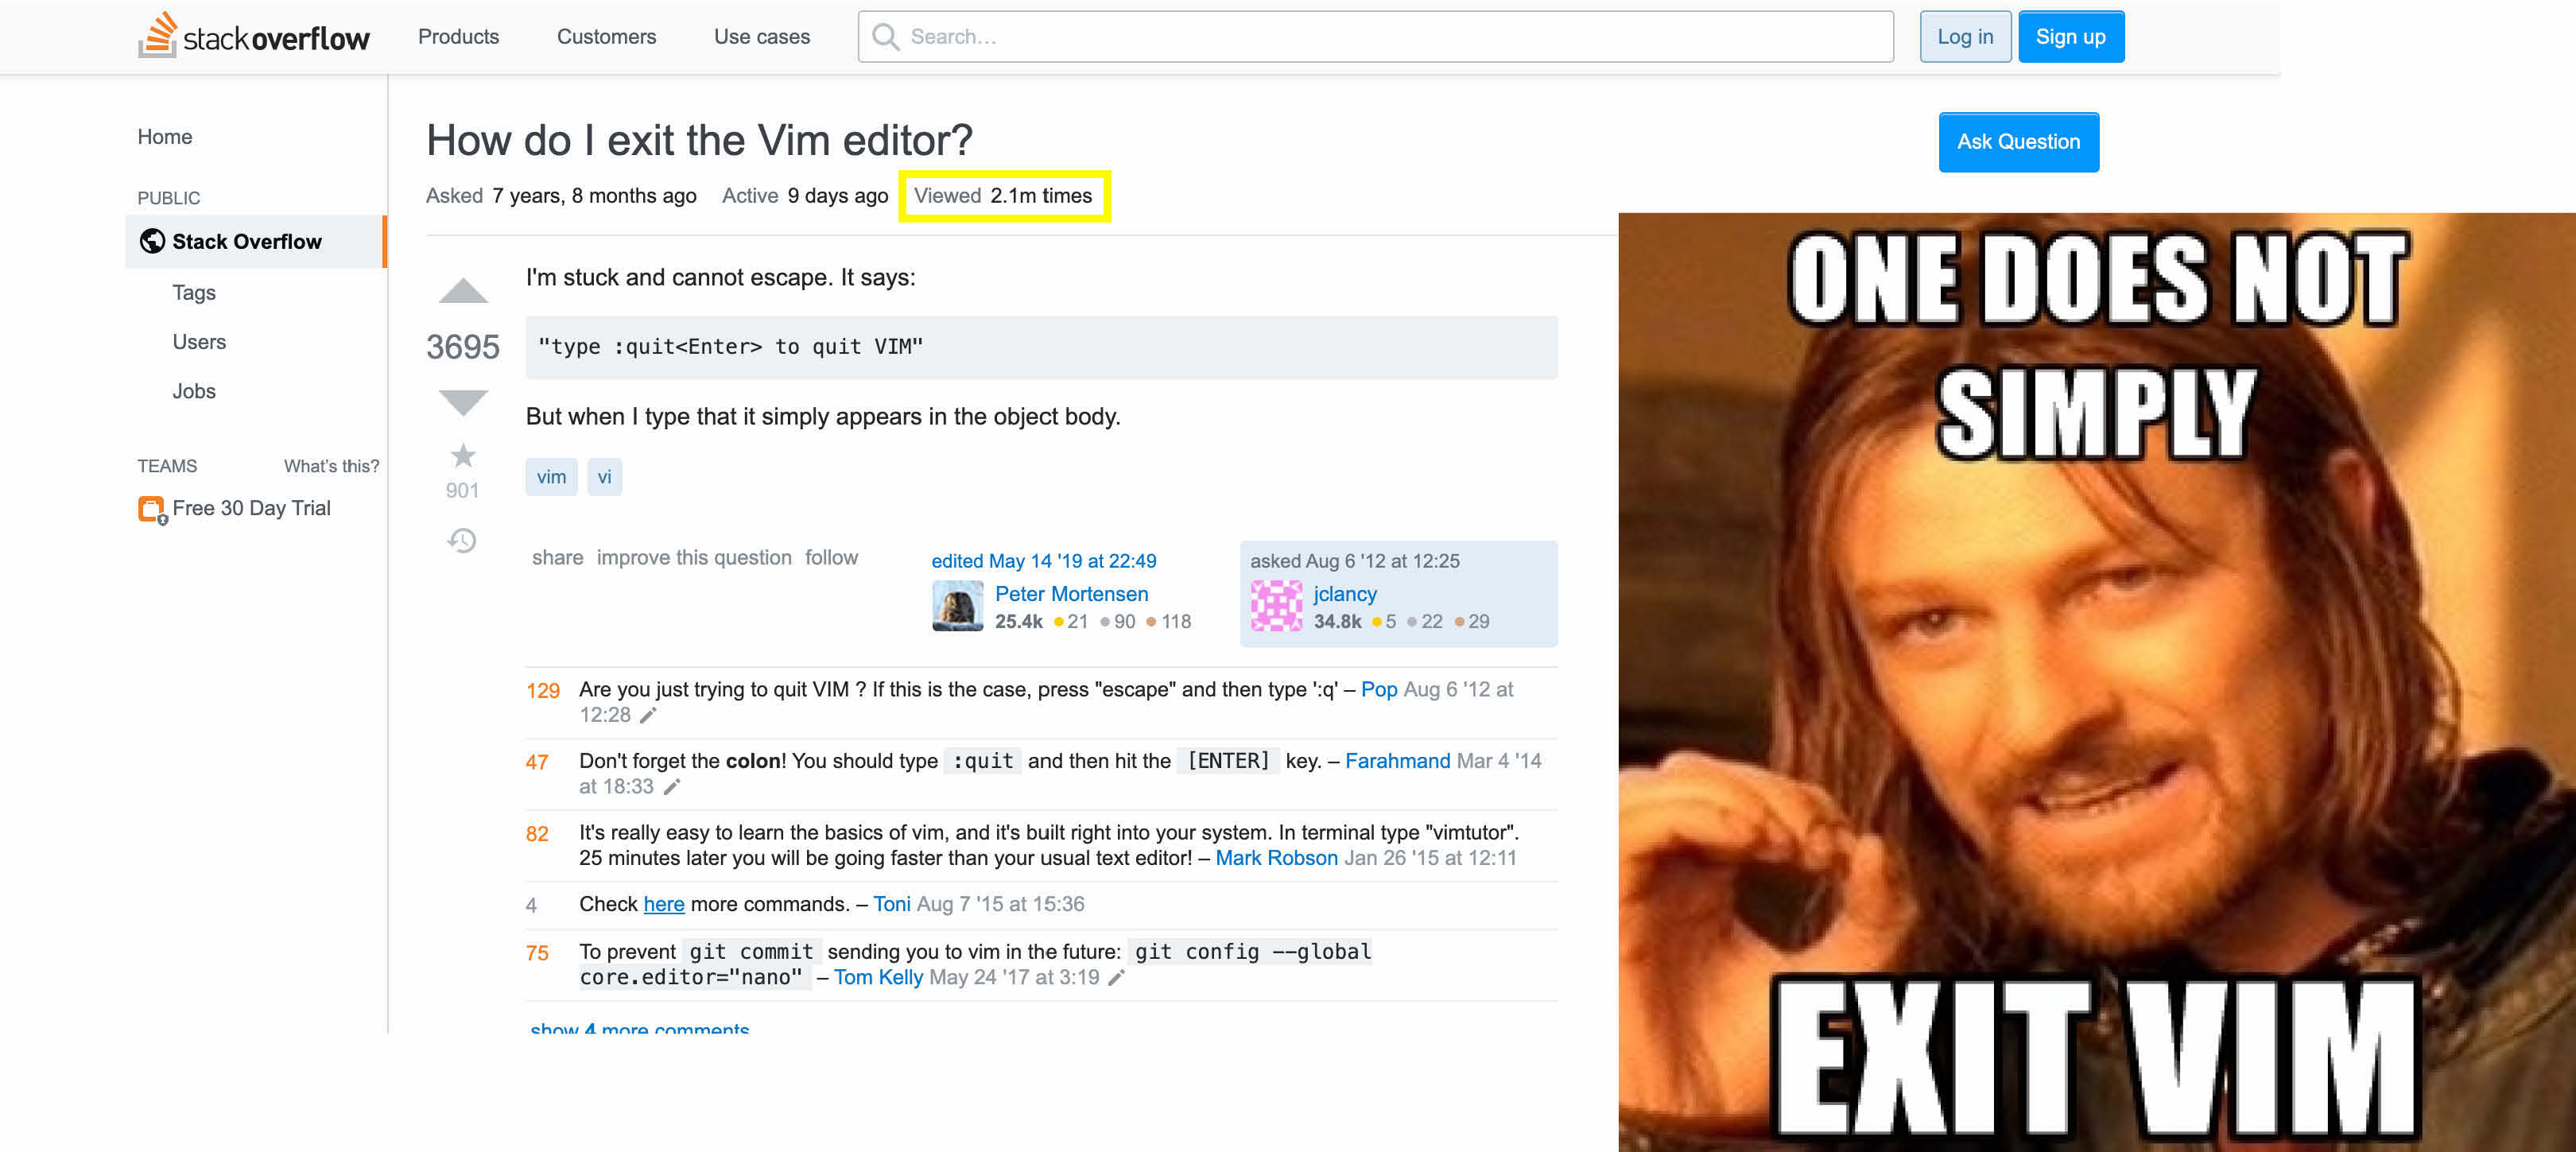 Over 2 million people have asked how to quit Vim on Stack Overflow...